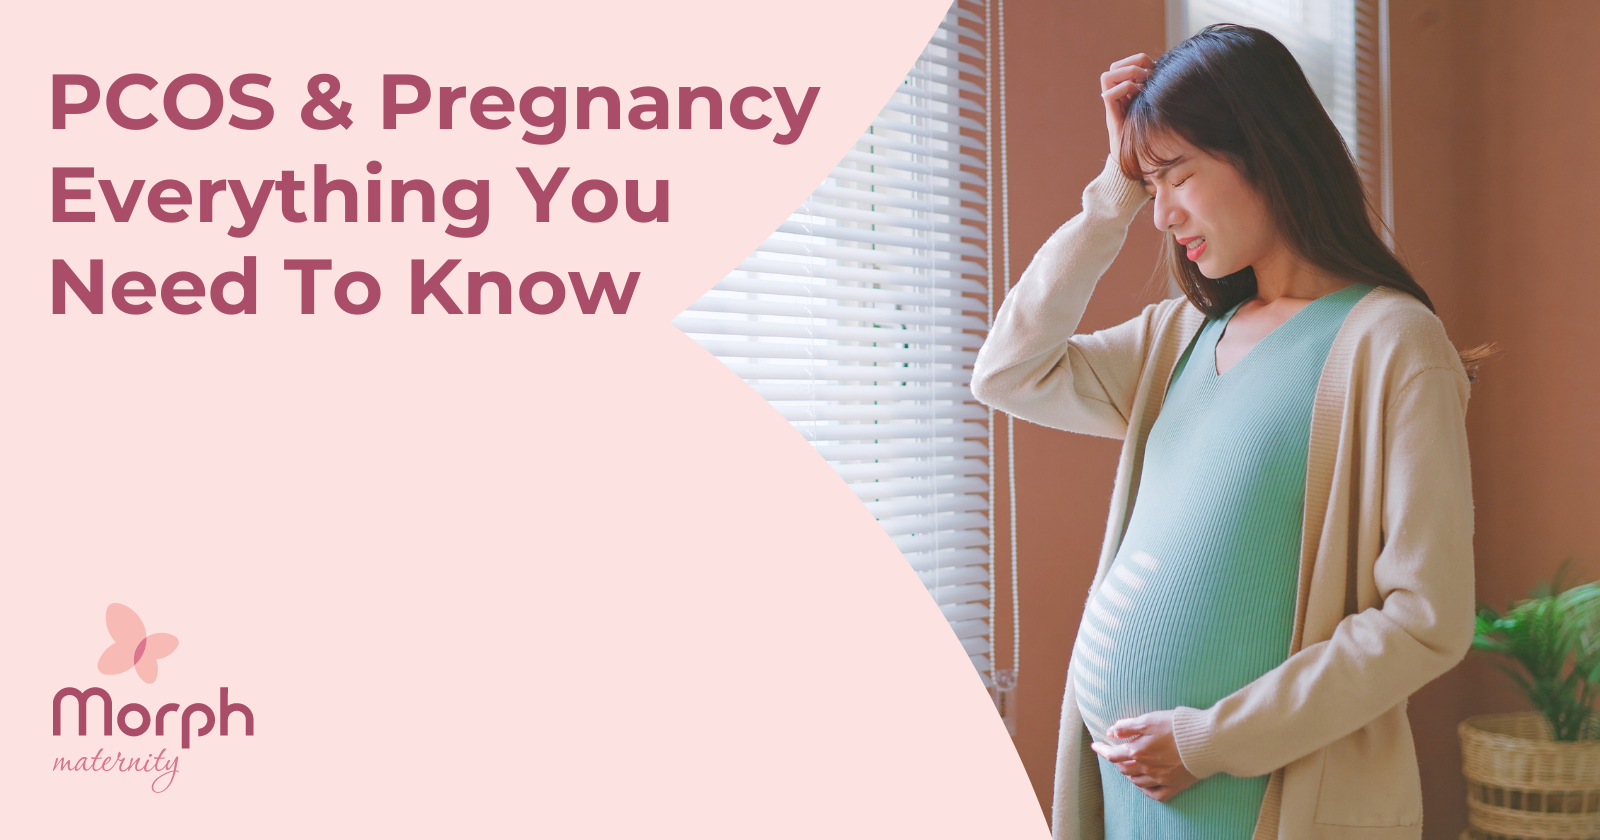 Image of a worried pregnant woman with the heading: "PCOS & Pregnancy - Everything You Need To Know"